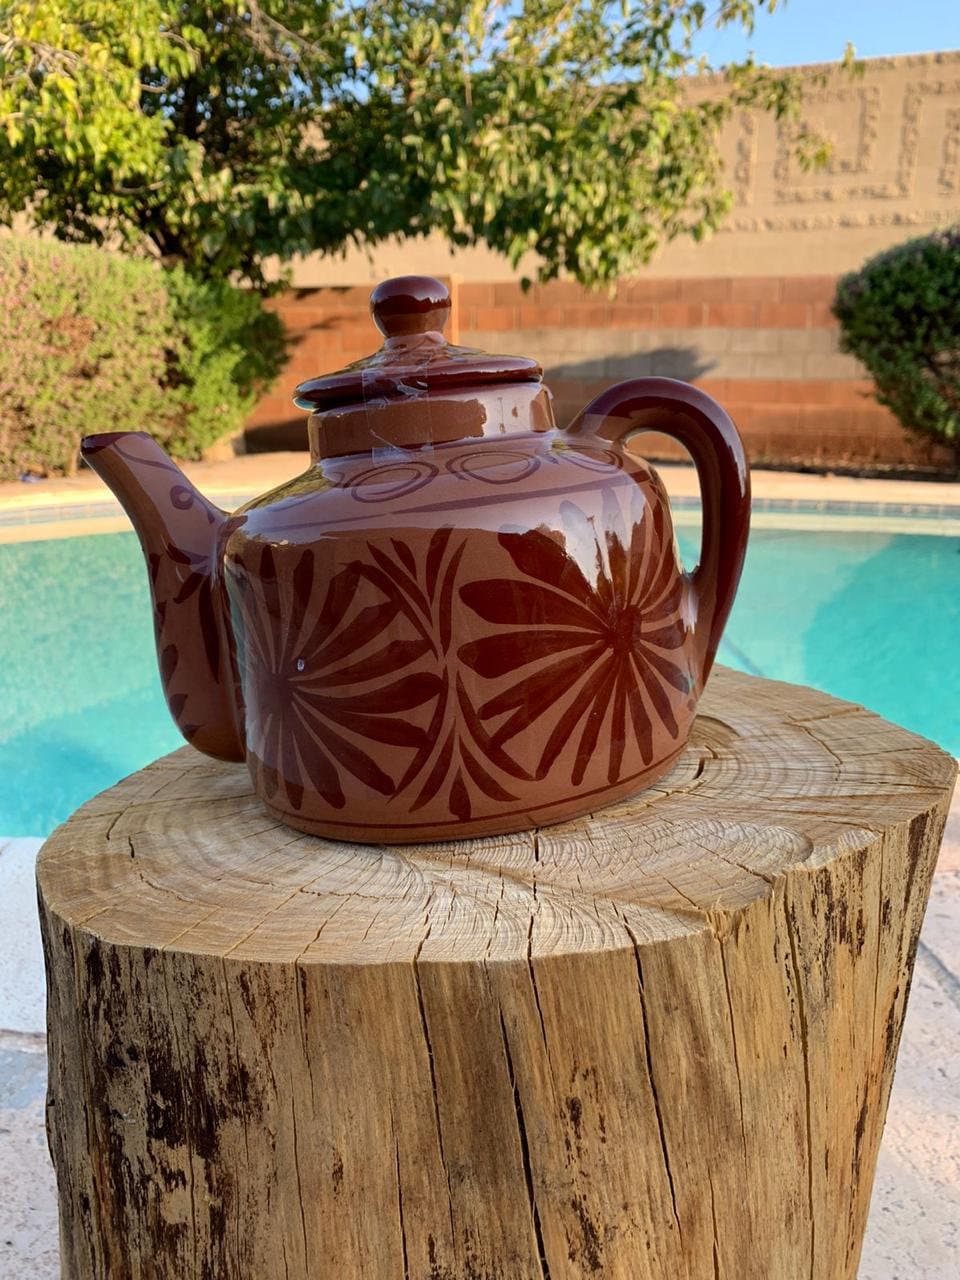 Small Brown Ceramic Hand Painted Tea Pot Made in Japan - I Like Mikes Mid  Century Modern